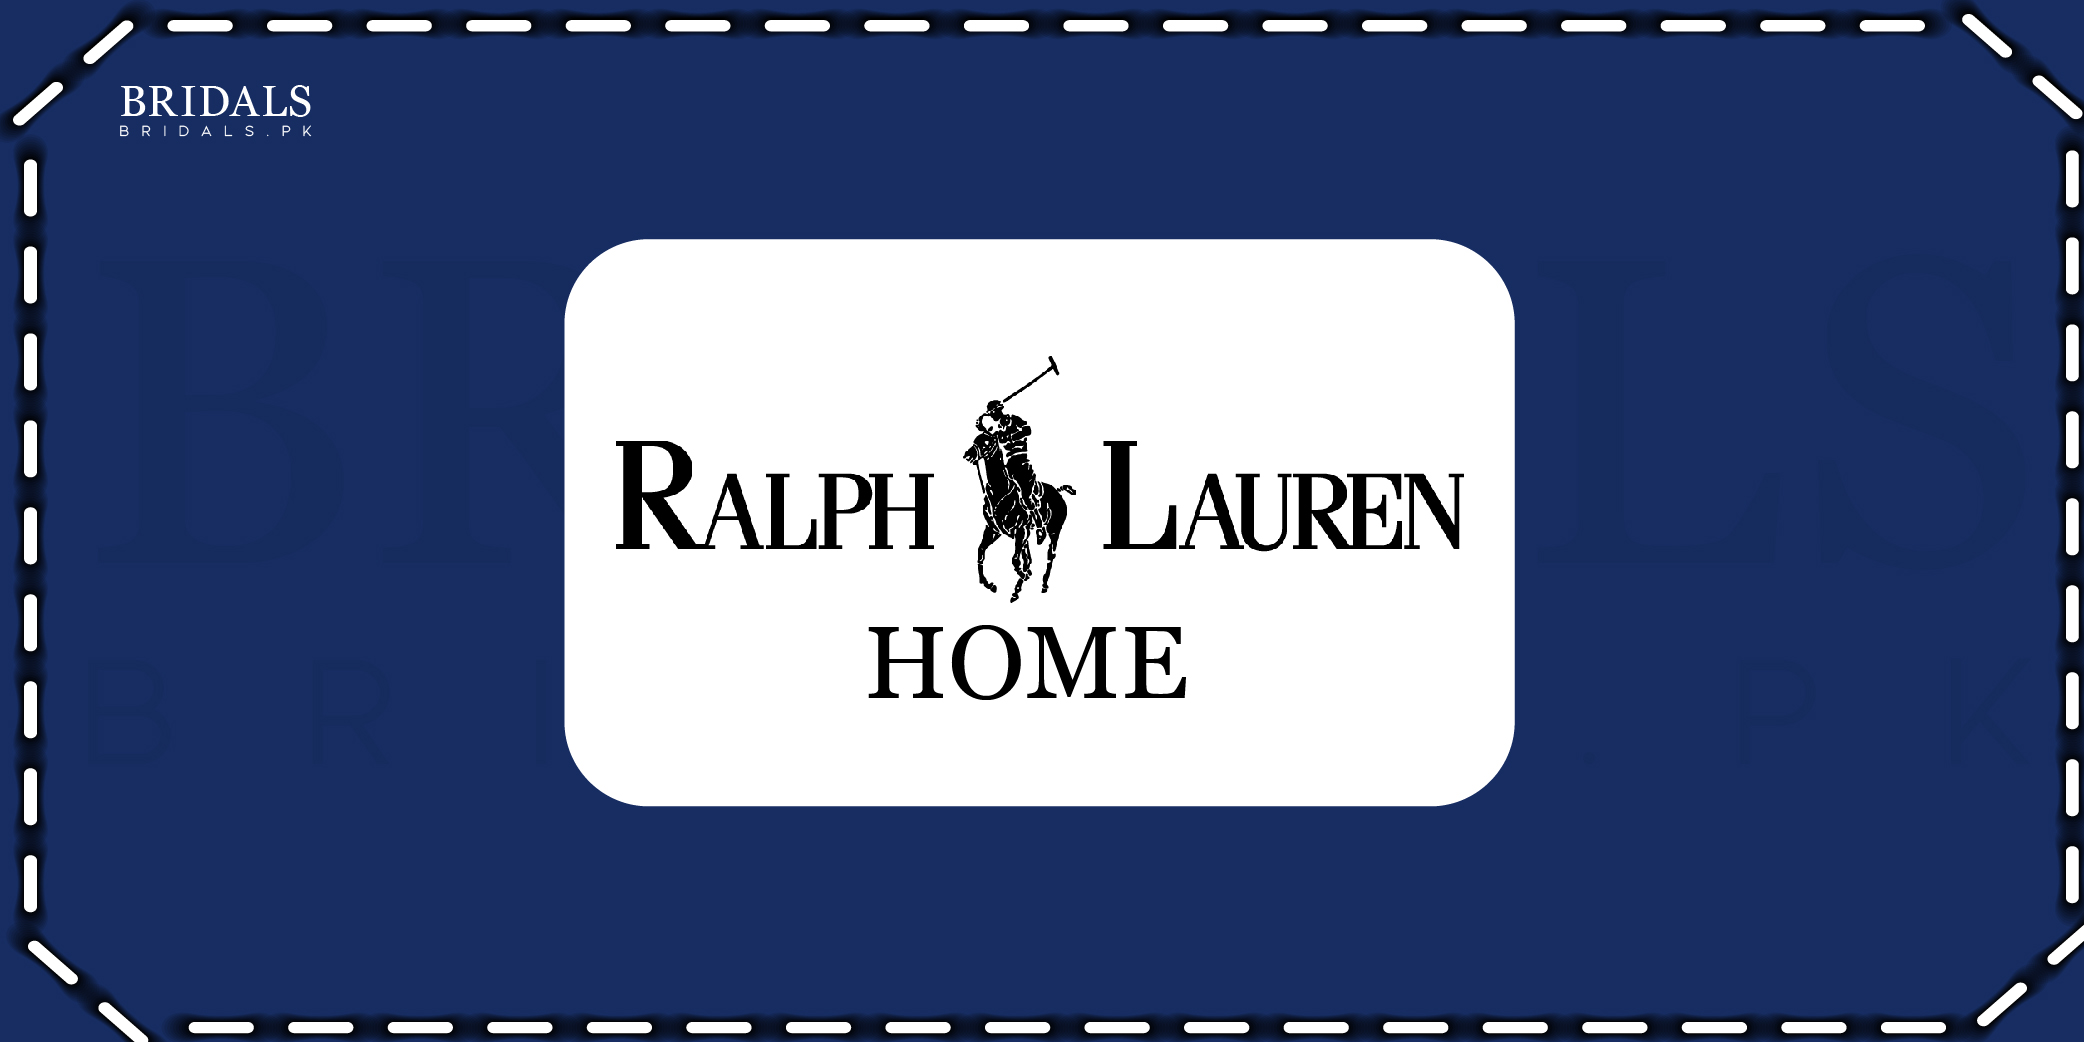 Ralph Lauren: Home Accessories To Decorate Your Space With!